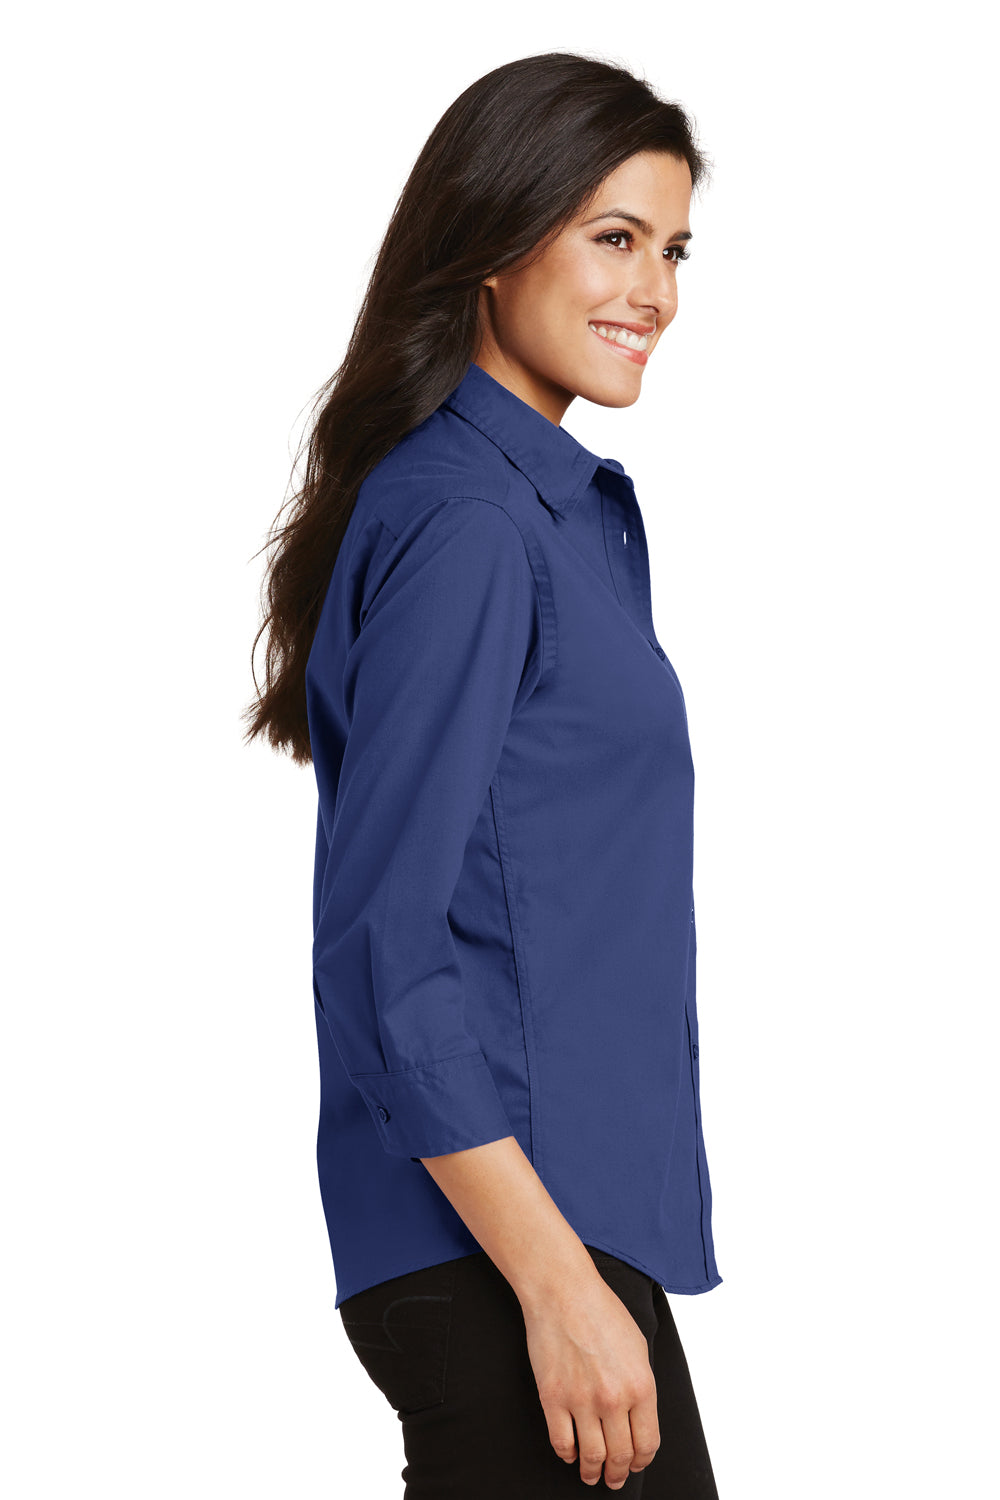 Port Authority L612 Womens Easy Care Wrinkle Resistant 3/4 Sleeve Button Down Shirt Mediterranean Blue Side